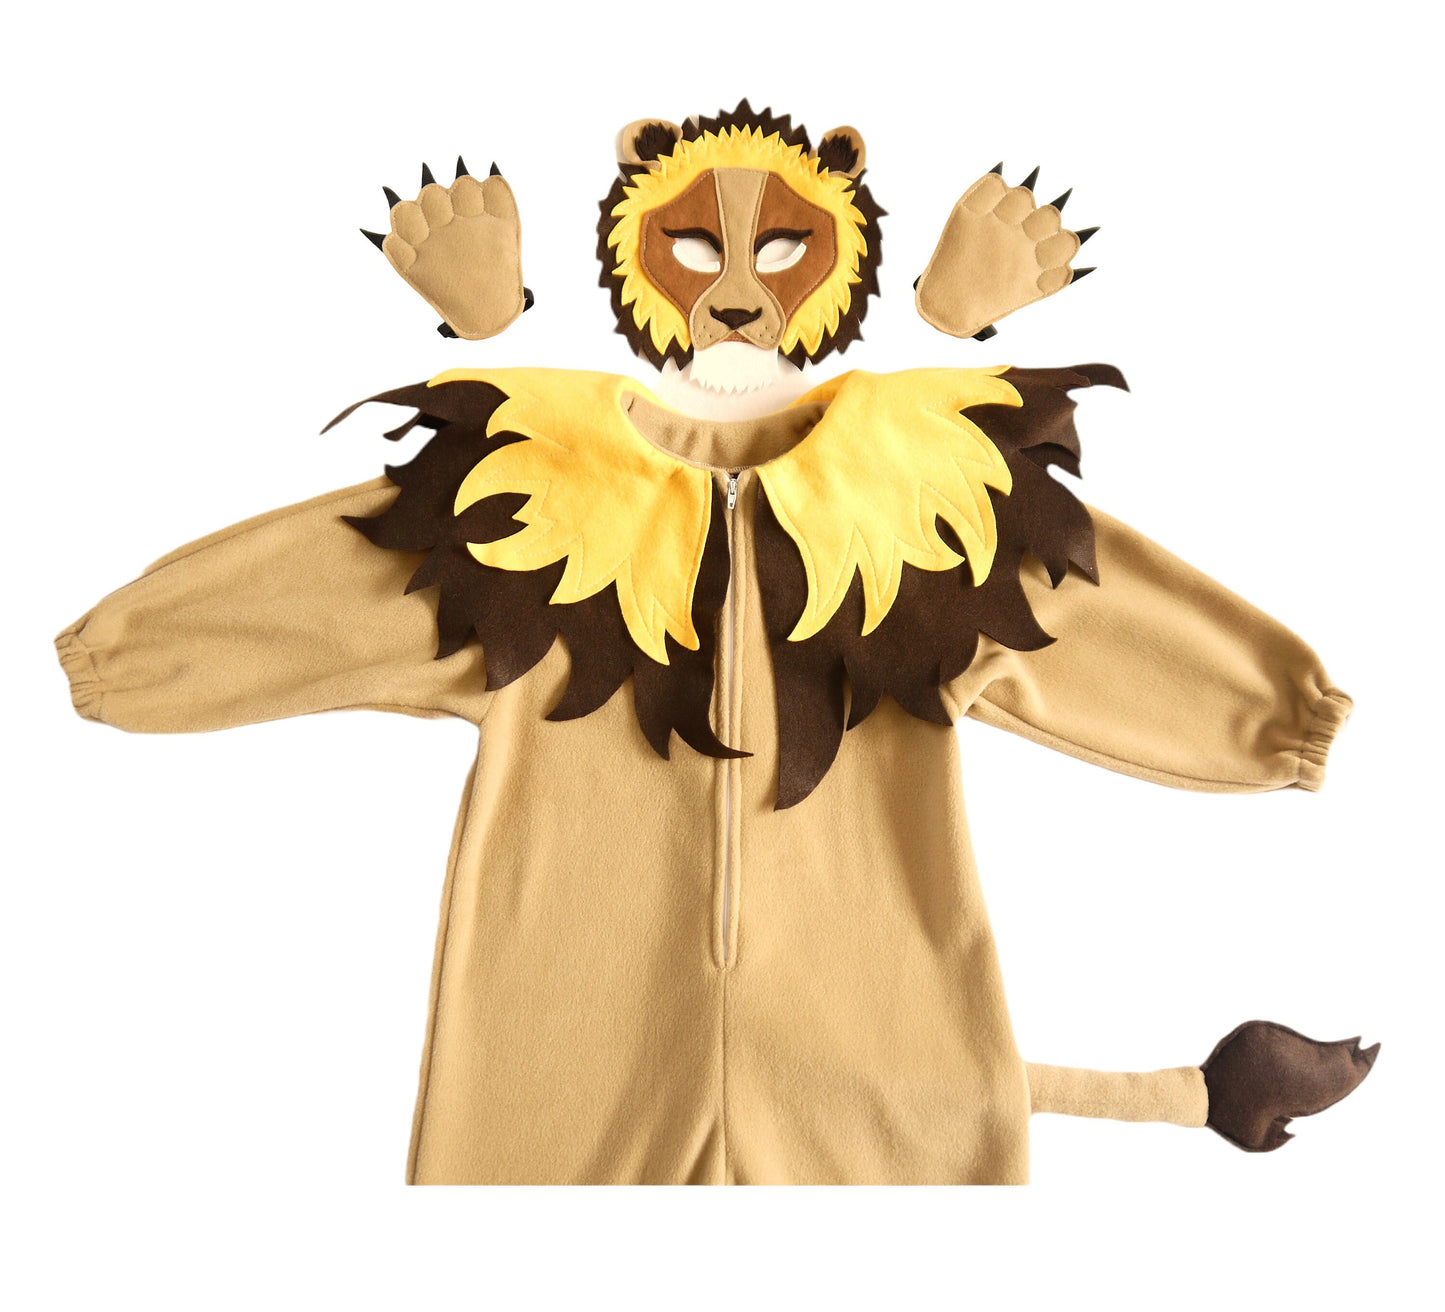 Lion costume onesie, mask and paws